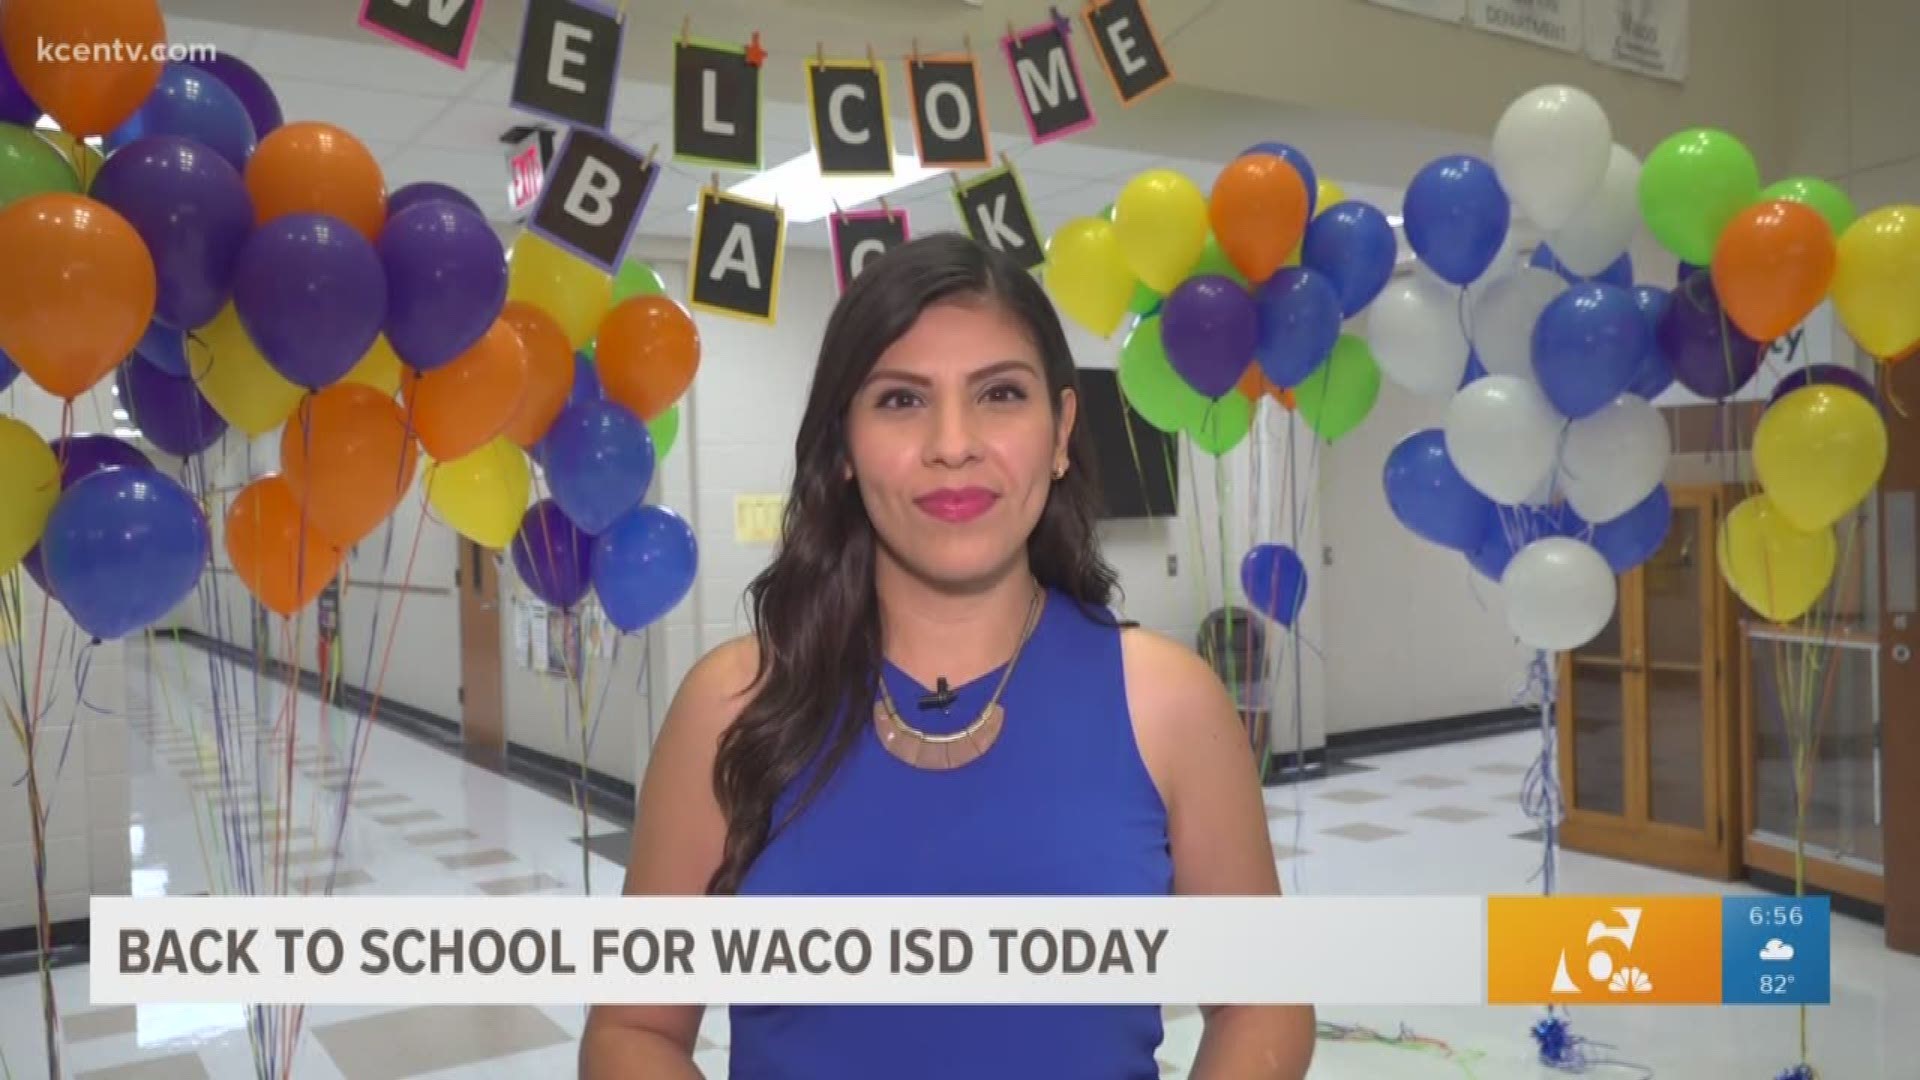 It's the first day back to school for students at Waco ISD and Midway ISD.